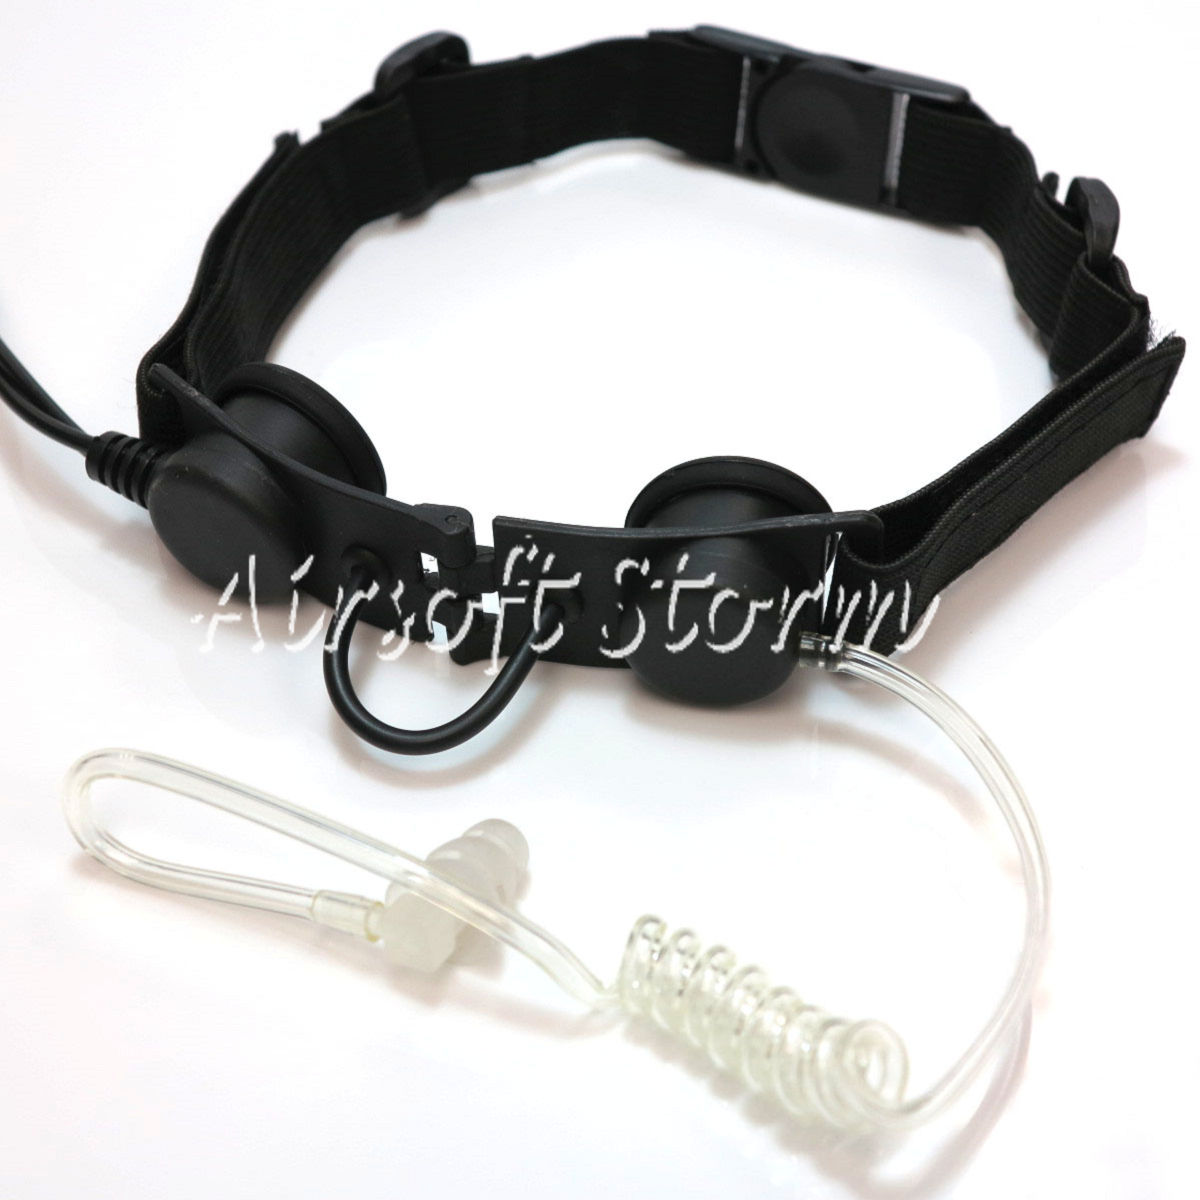 Airsoft Gear SWAT Z Tactical Throat Mic Headset Black